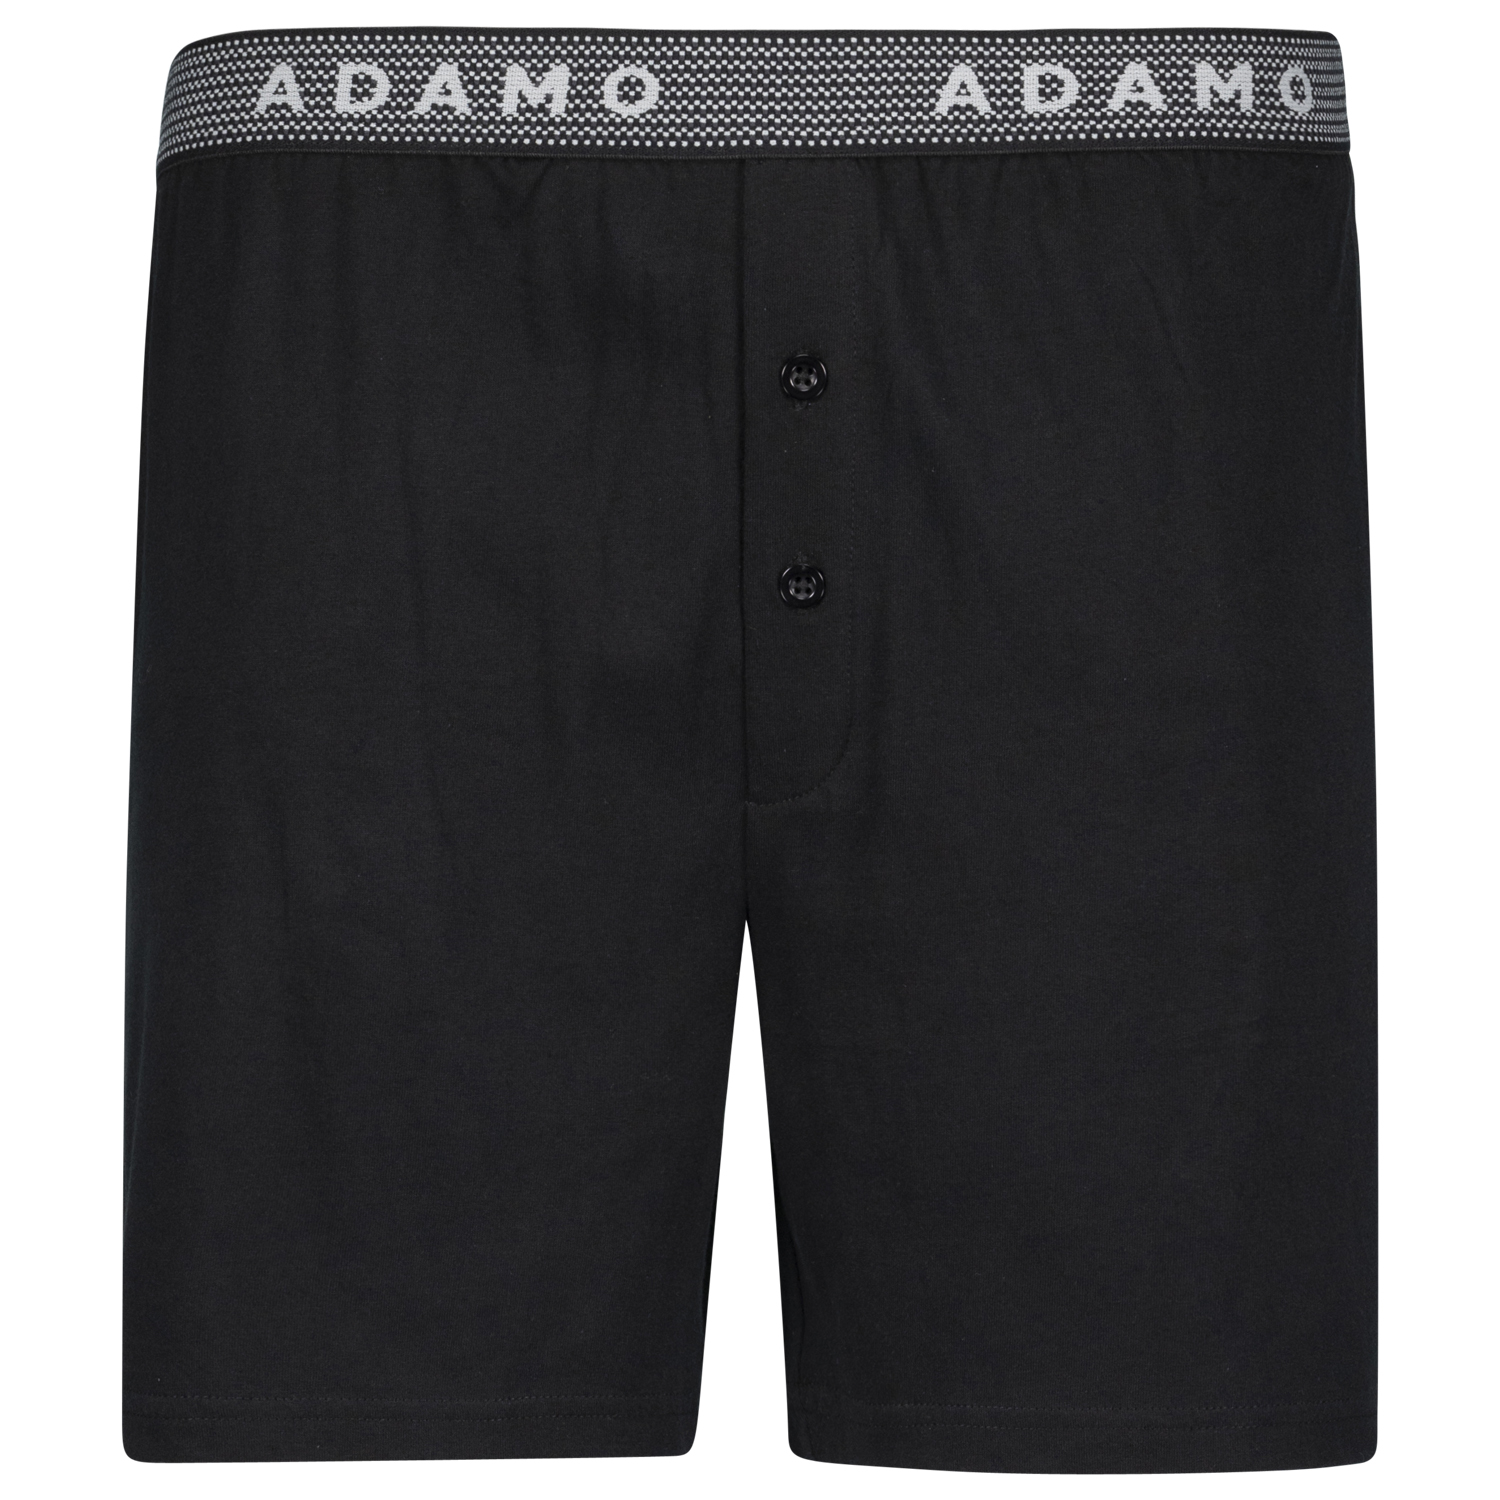 Black boxershorts by ADAMO series "Jonas" in oversizes up to 20 // double pack